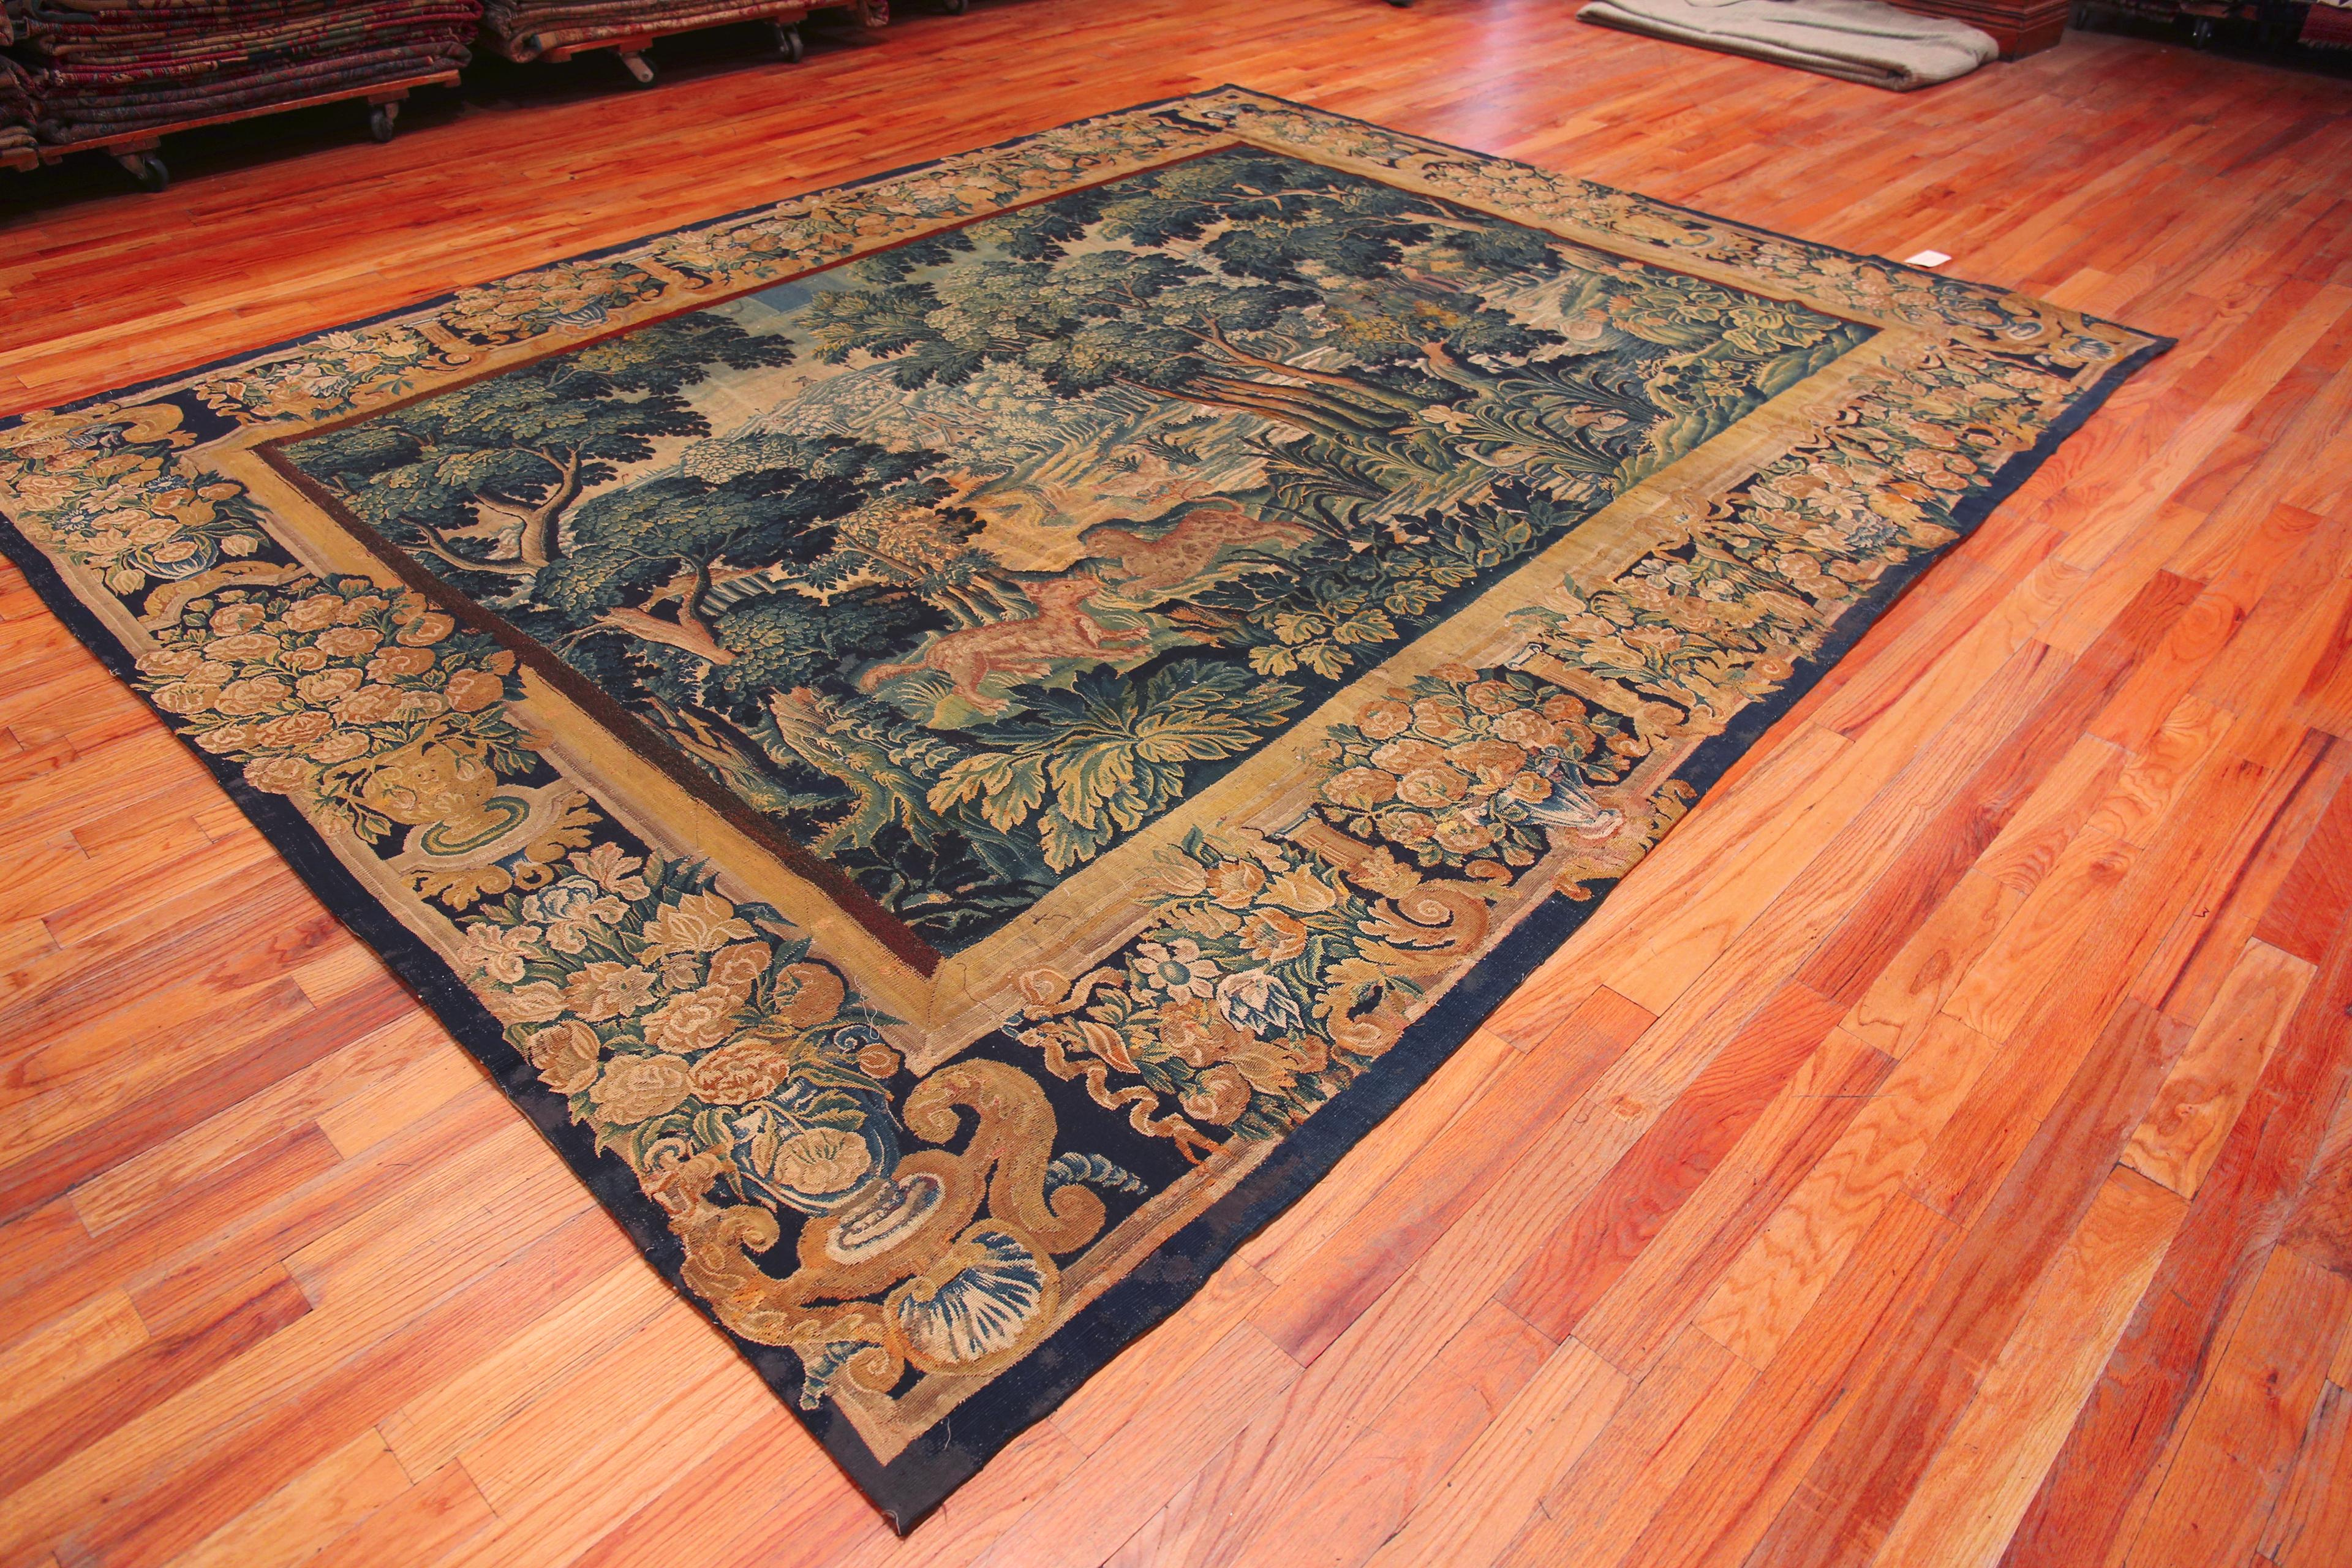 Amazing 17th Century Antique French Silk And Wool Verdure Tapestry 10' x 12'10